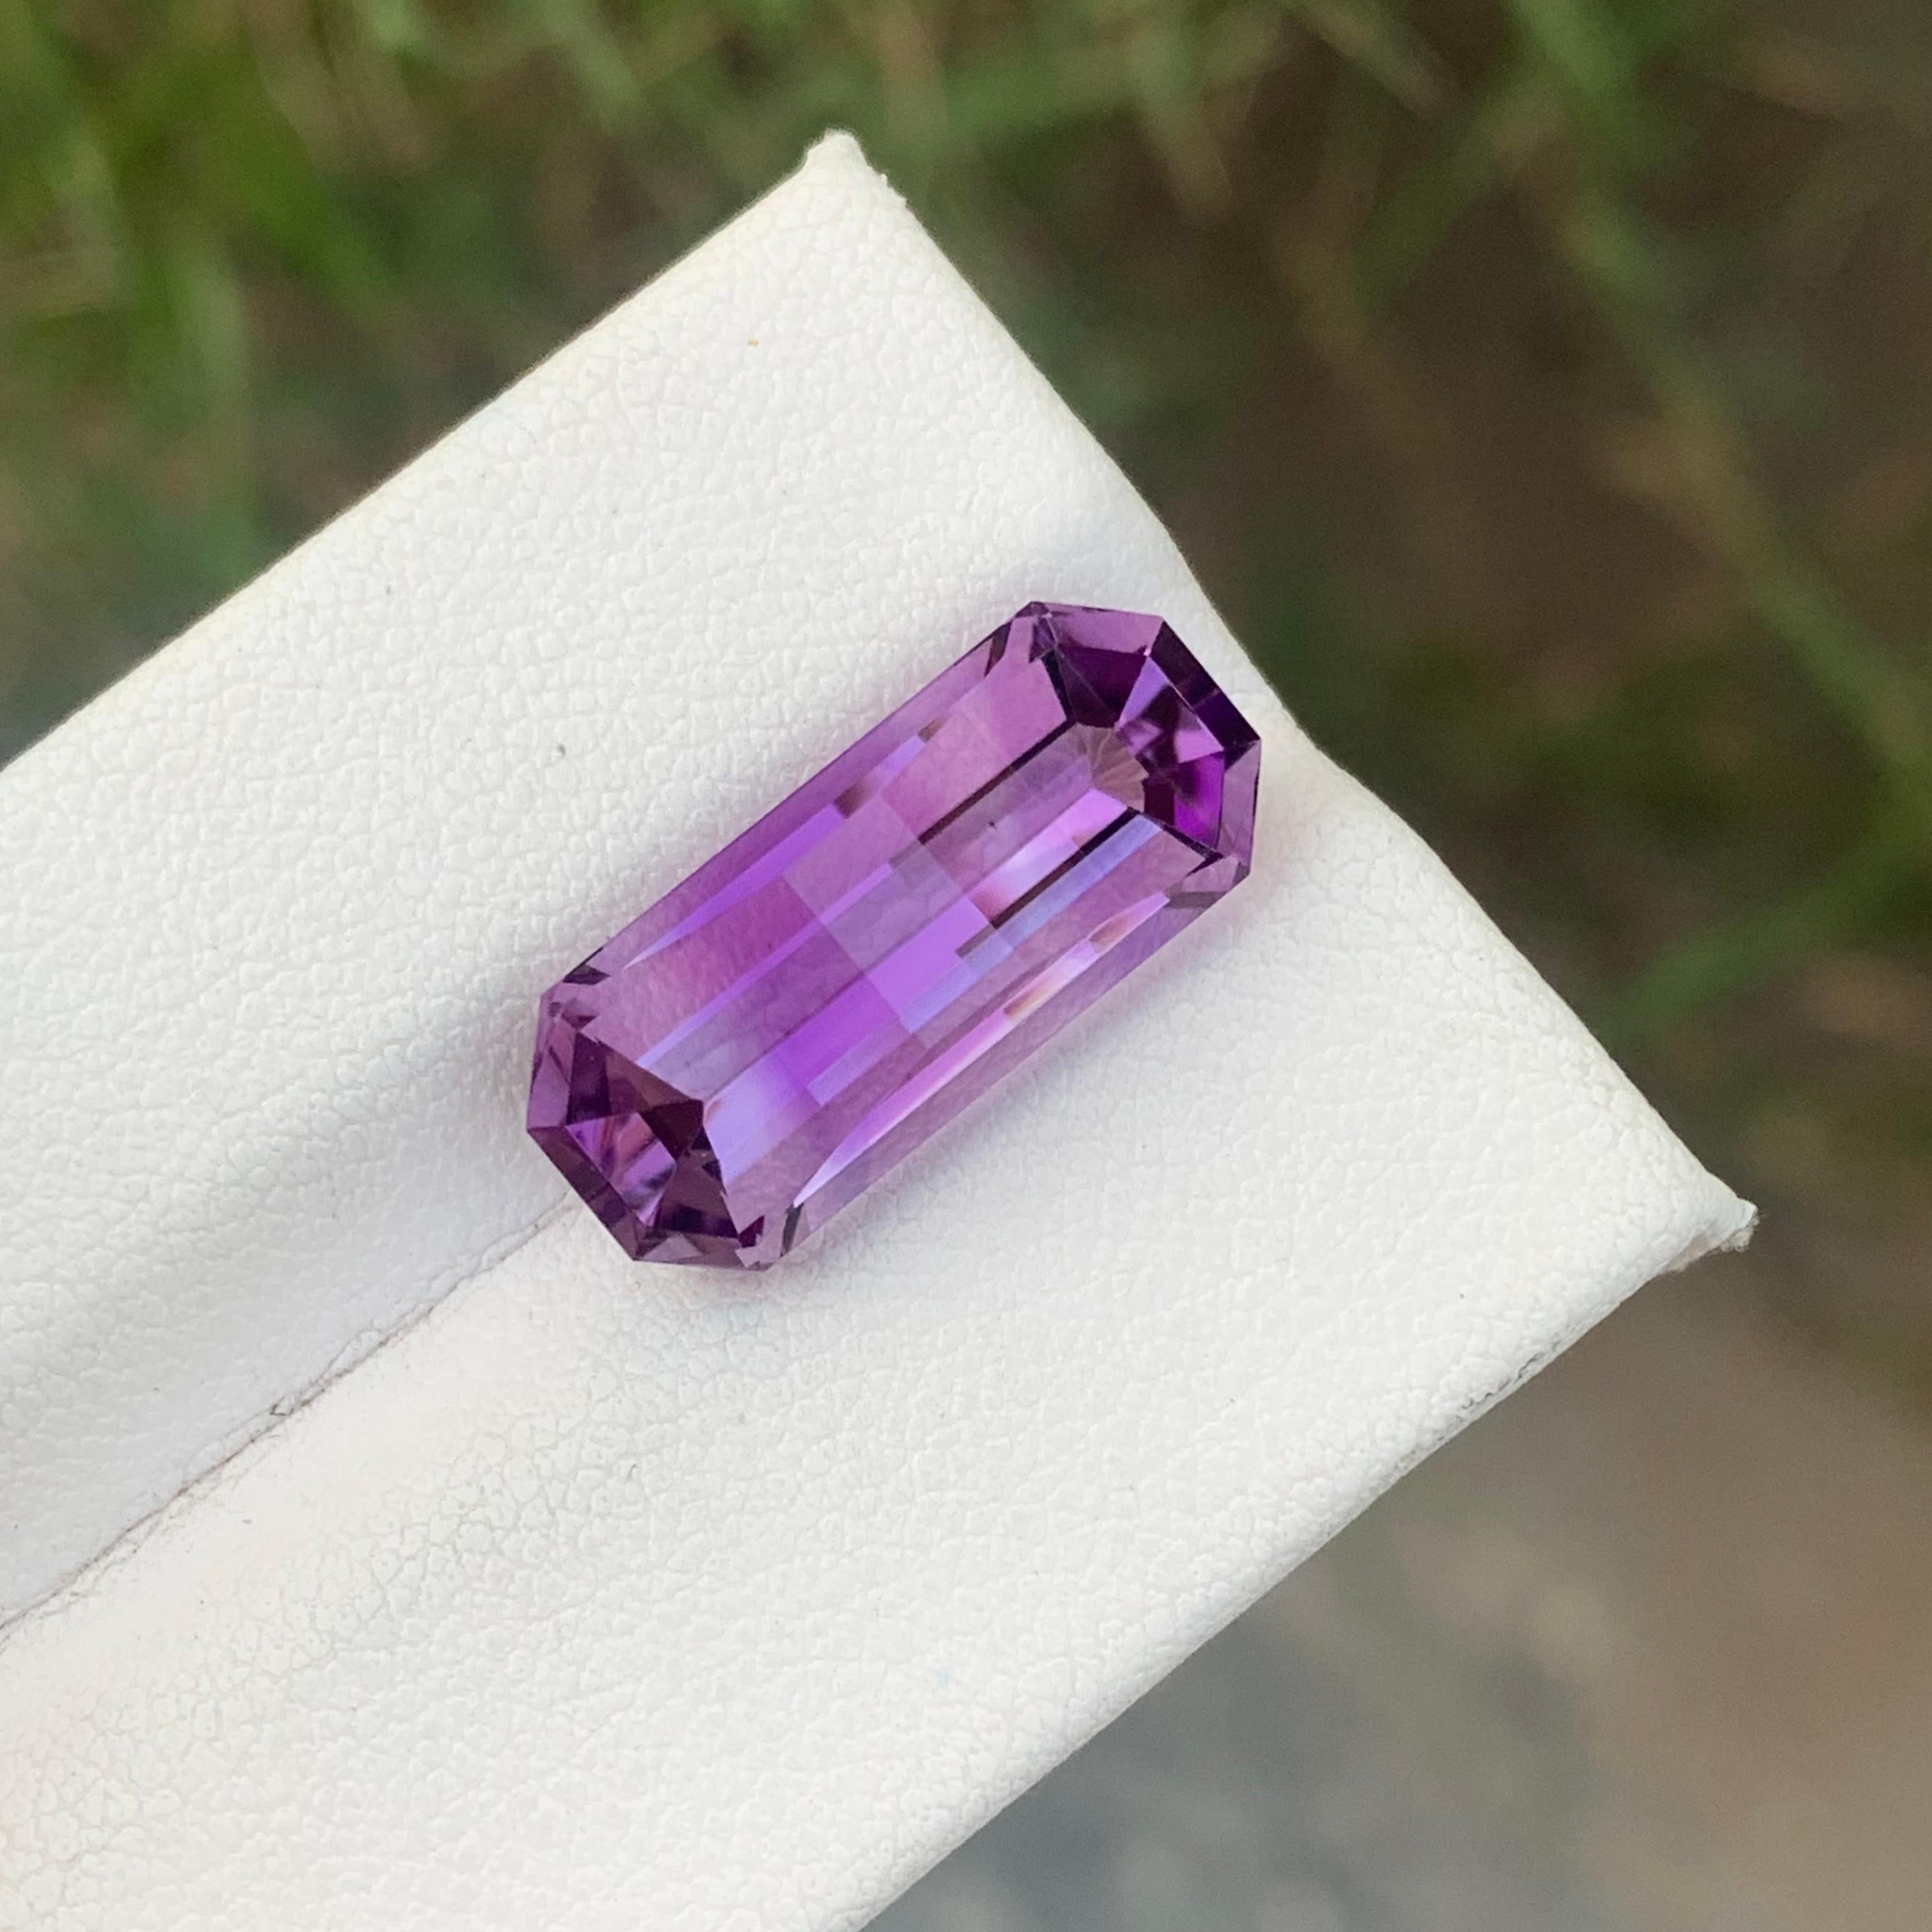 8.25cts Natural Loose Amethyst Gemstone Pixel Pixelated Cut From Brazil Mine For Sale 3